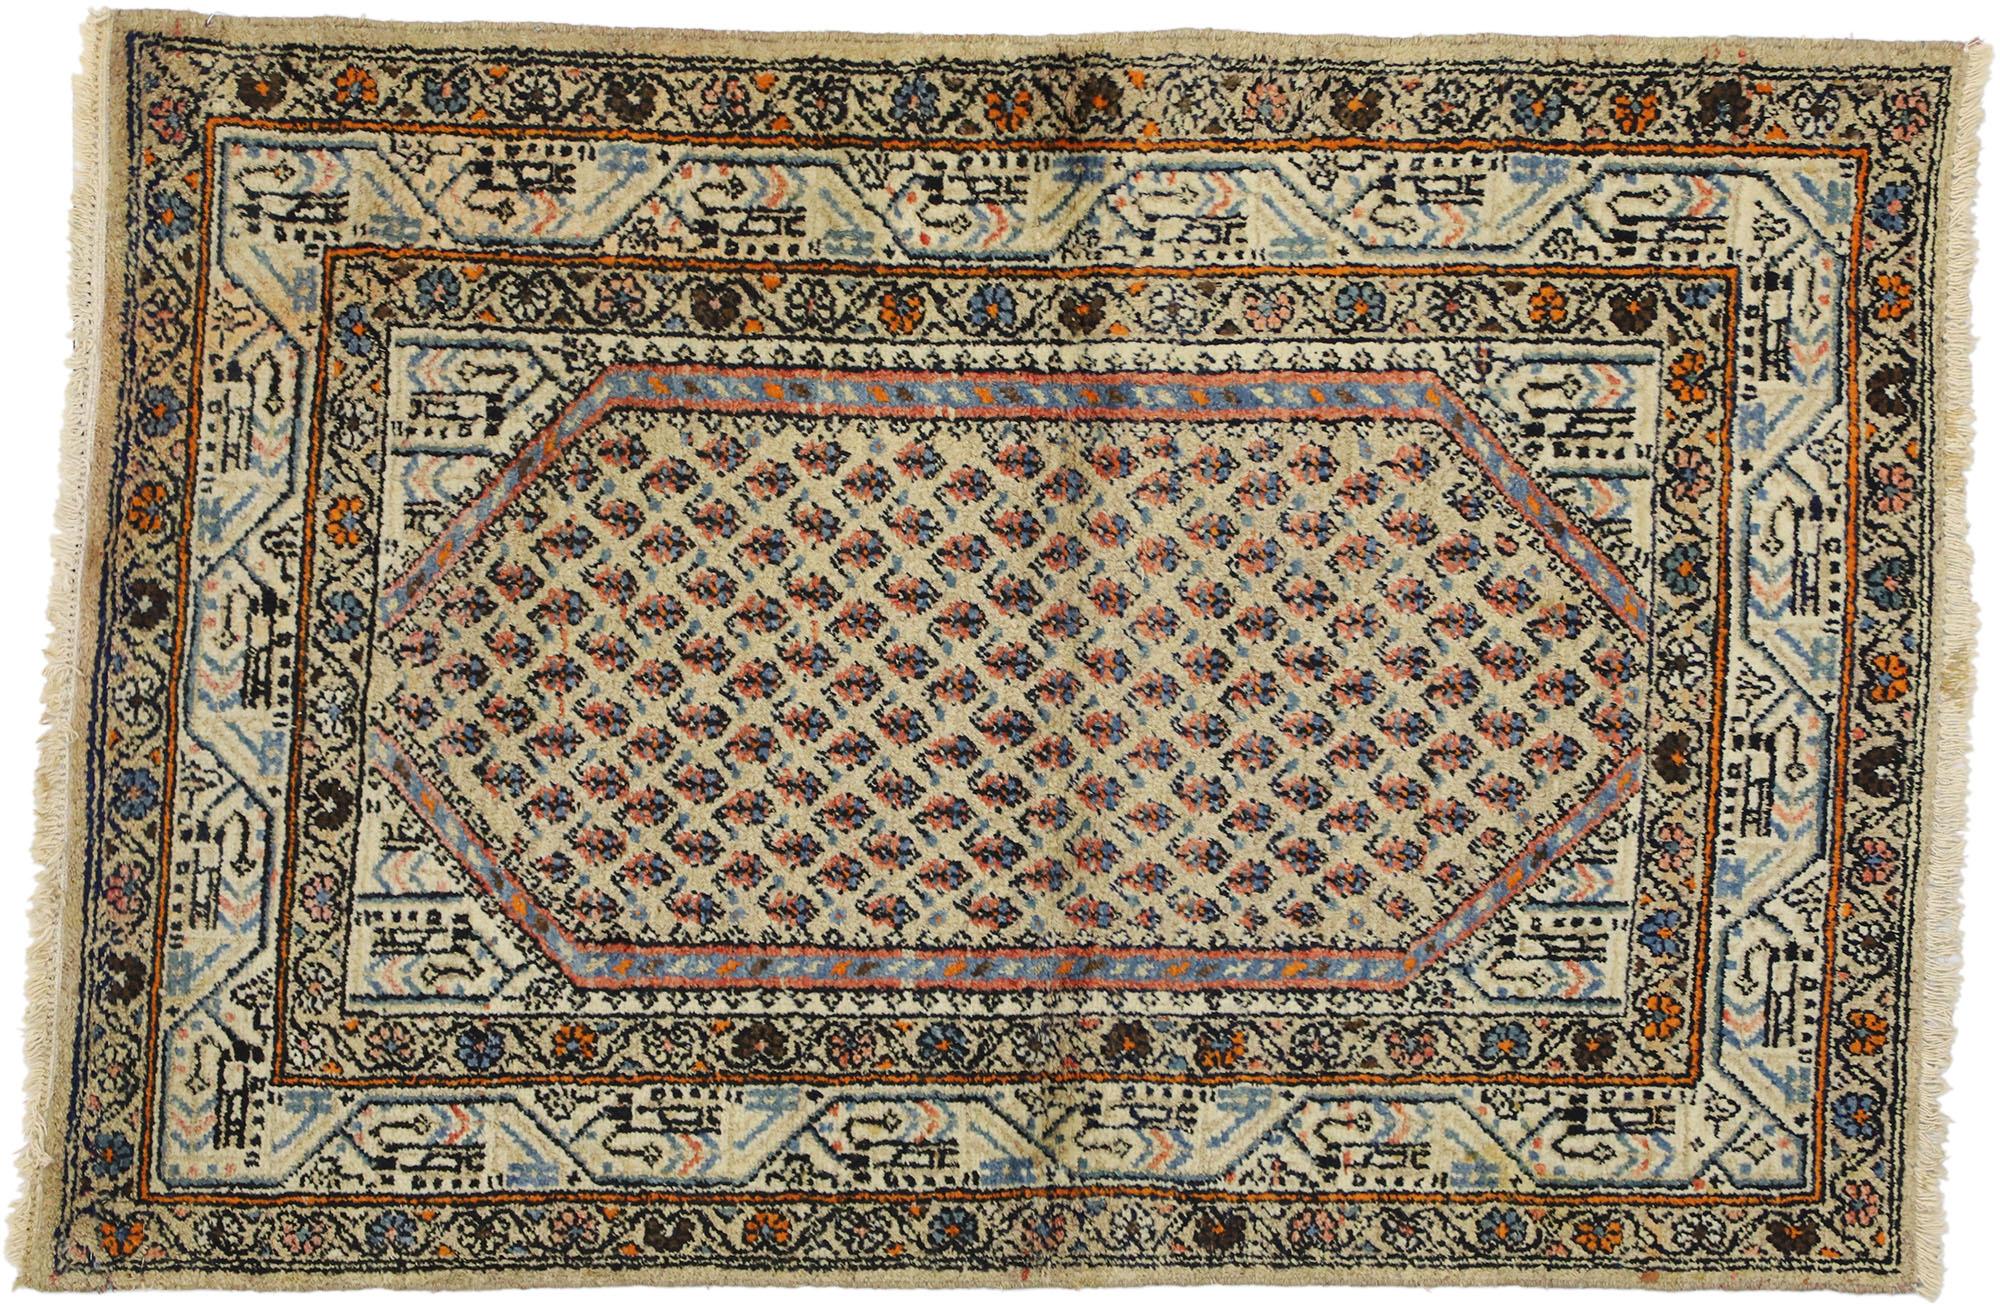 72633 antique Persian Saraband rug with mir boteh design. The antique Persian Saraband rug features a delicate pattern of mir boteh motifs in diagonal rows in a beige field. The boteh resembles sprouting seed and is known as the 